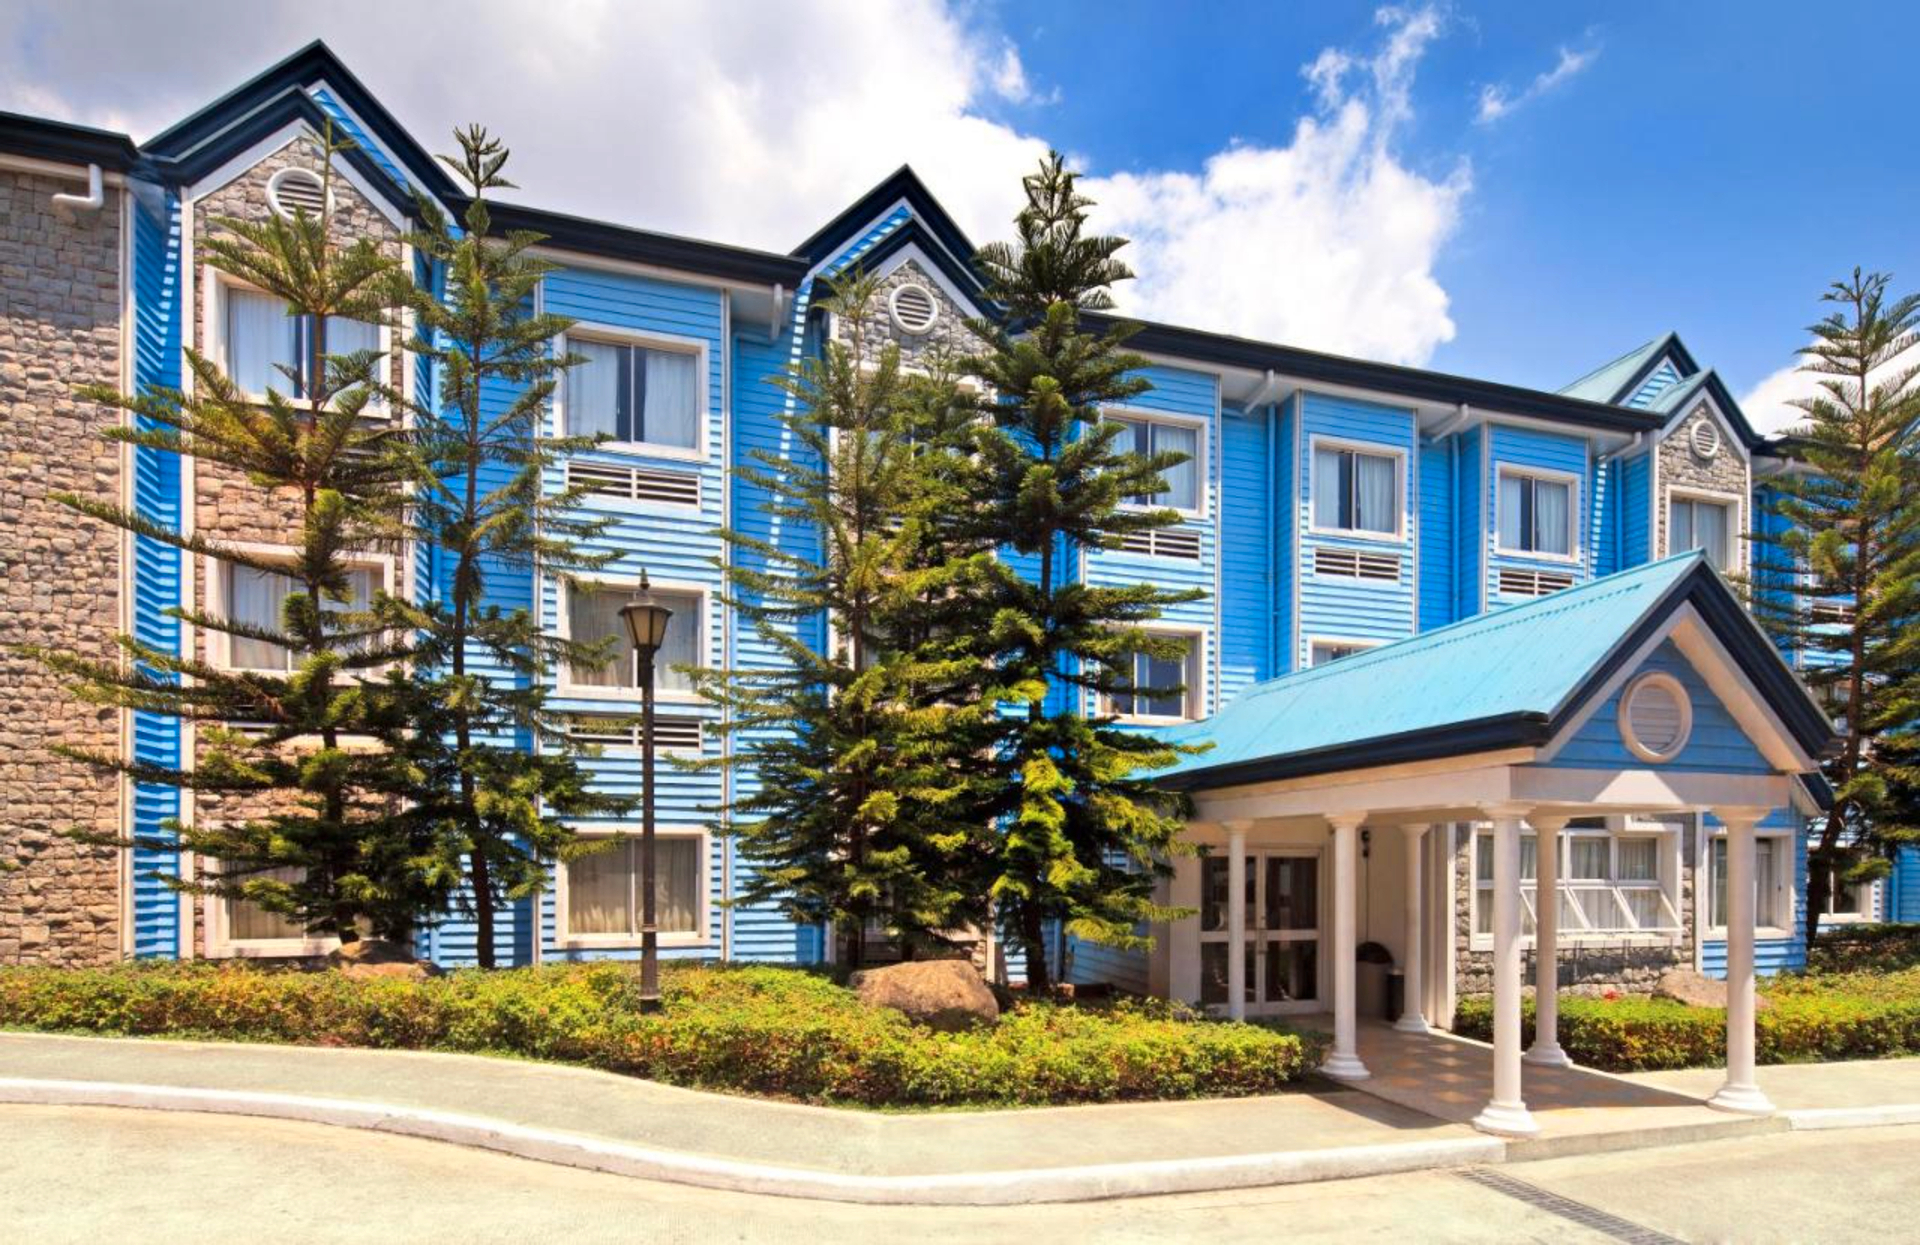 Microtel by Wyndham Baguio, Baguio City